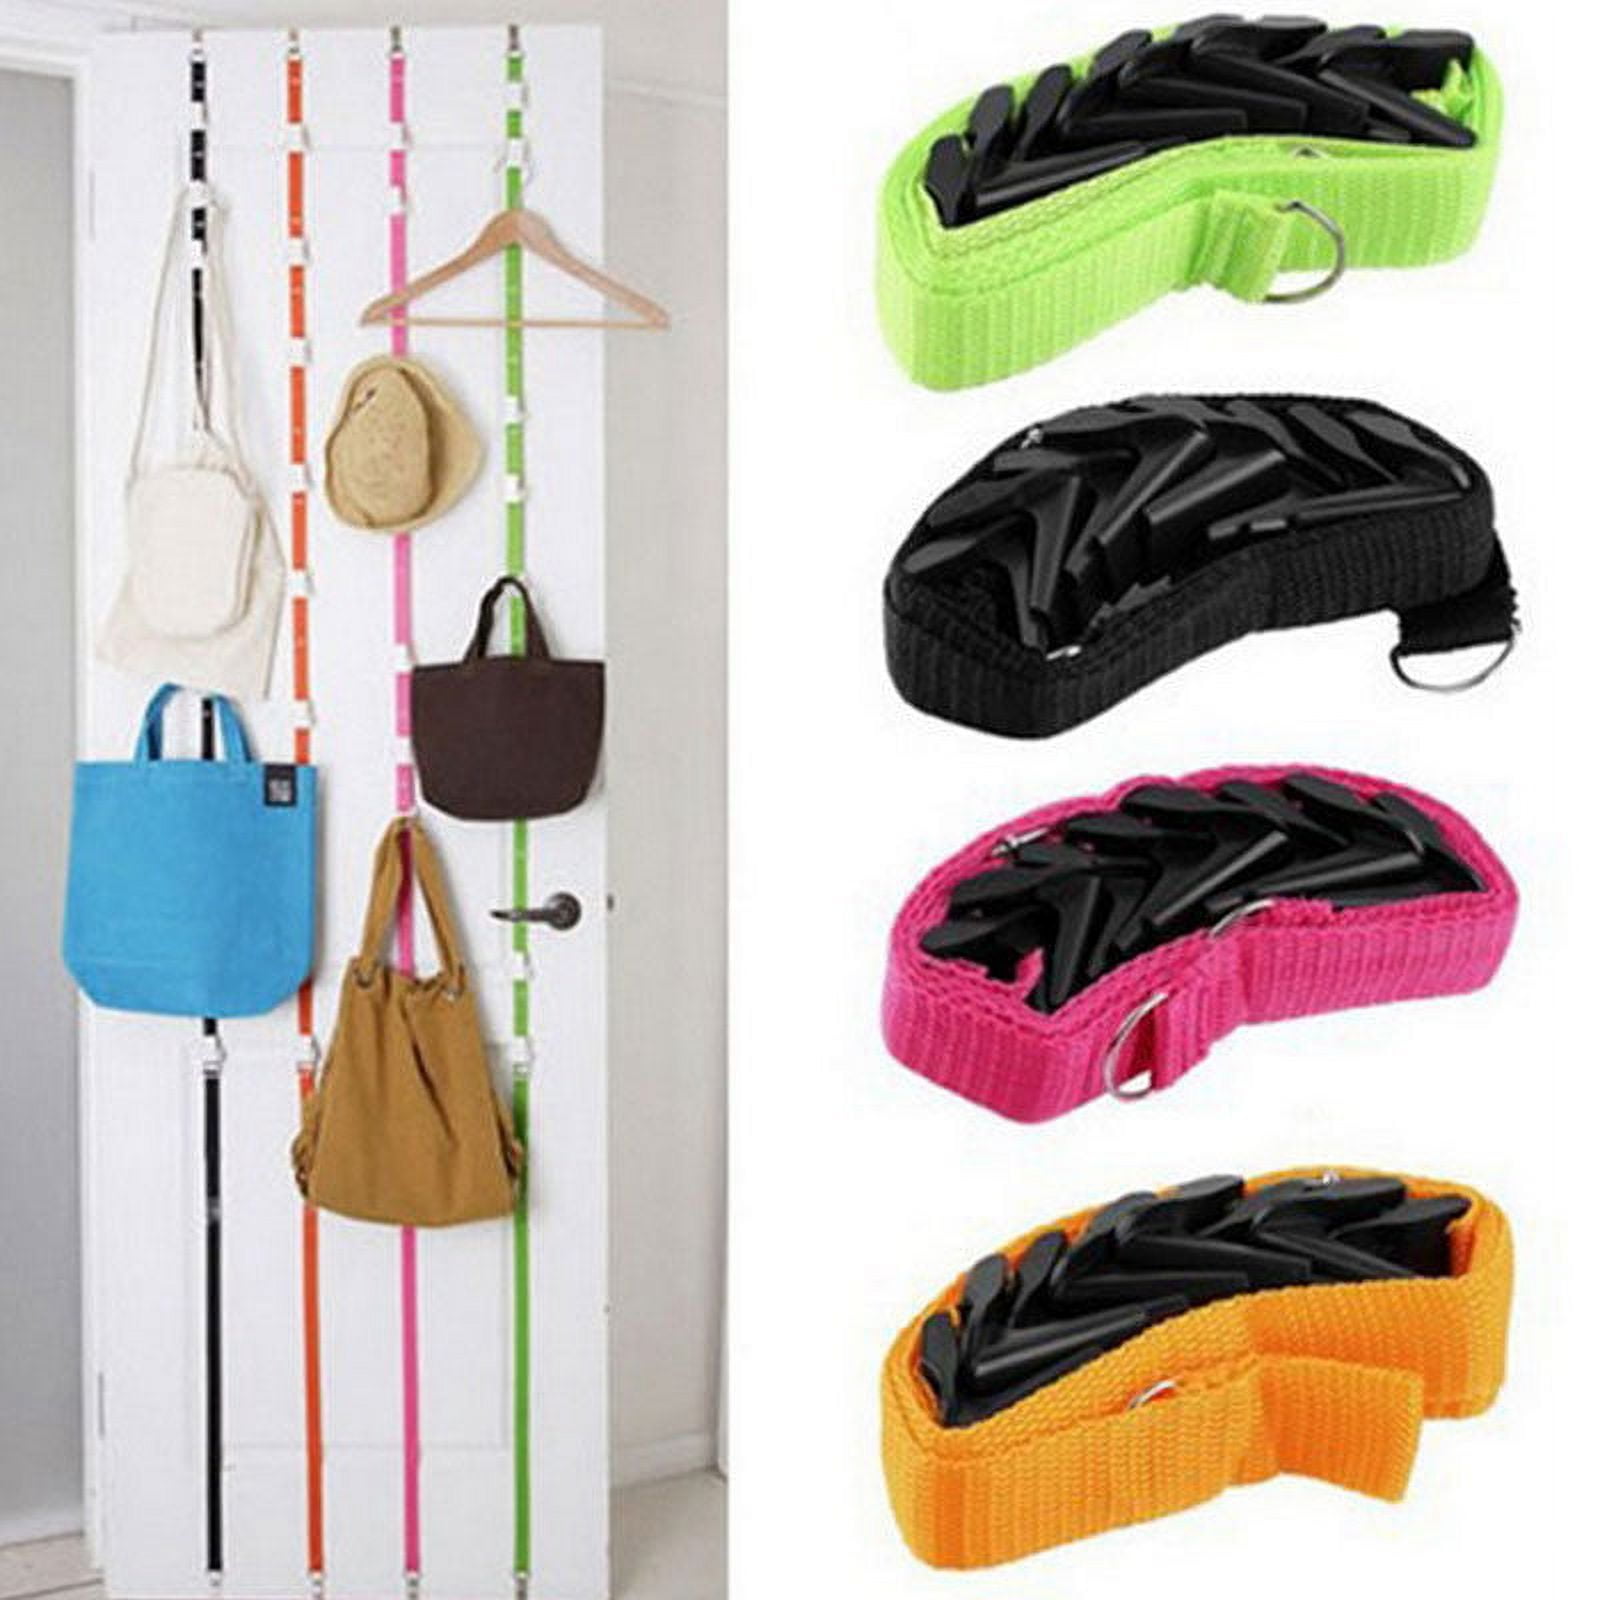 Musuos Adjustable Hanging Strap with 8 Hooks Clothes Hat Bag Over Door Hanger 4622ce4f bde9 4315 987f 24aa67f0fdd6.f7b56270a153a330dacb9930114ceddd